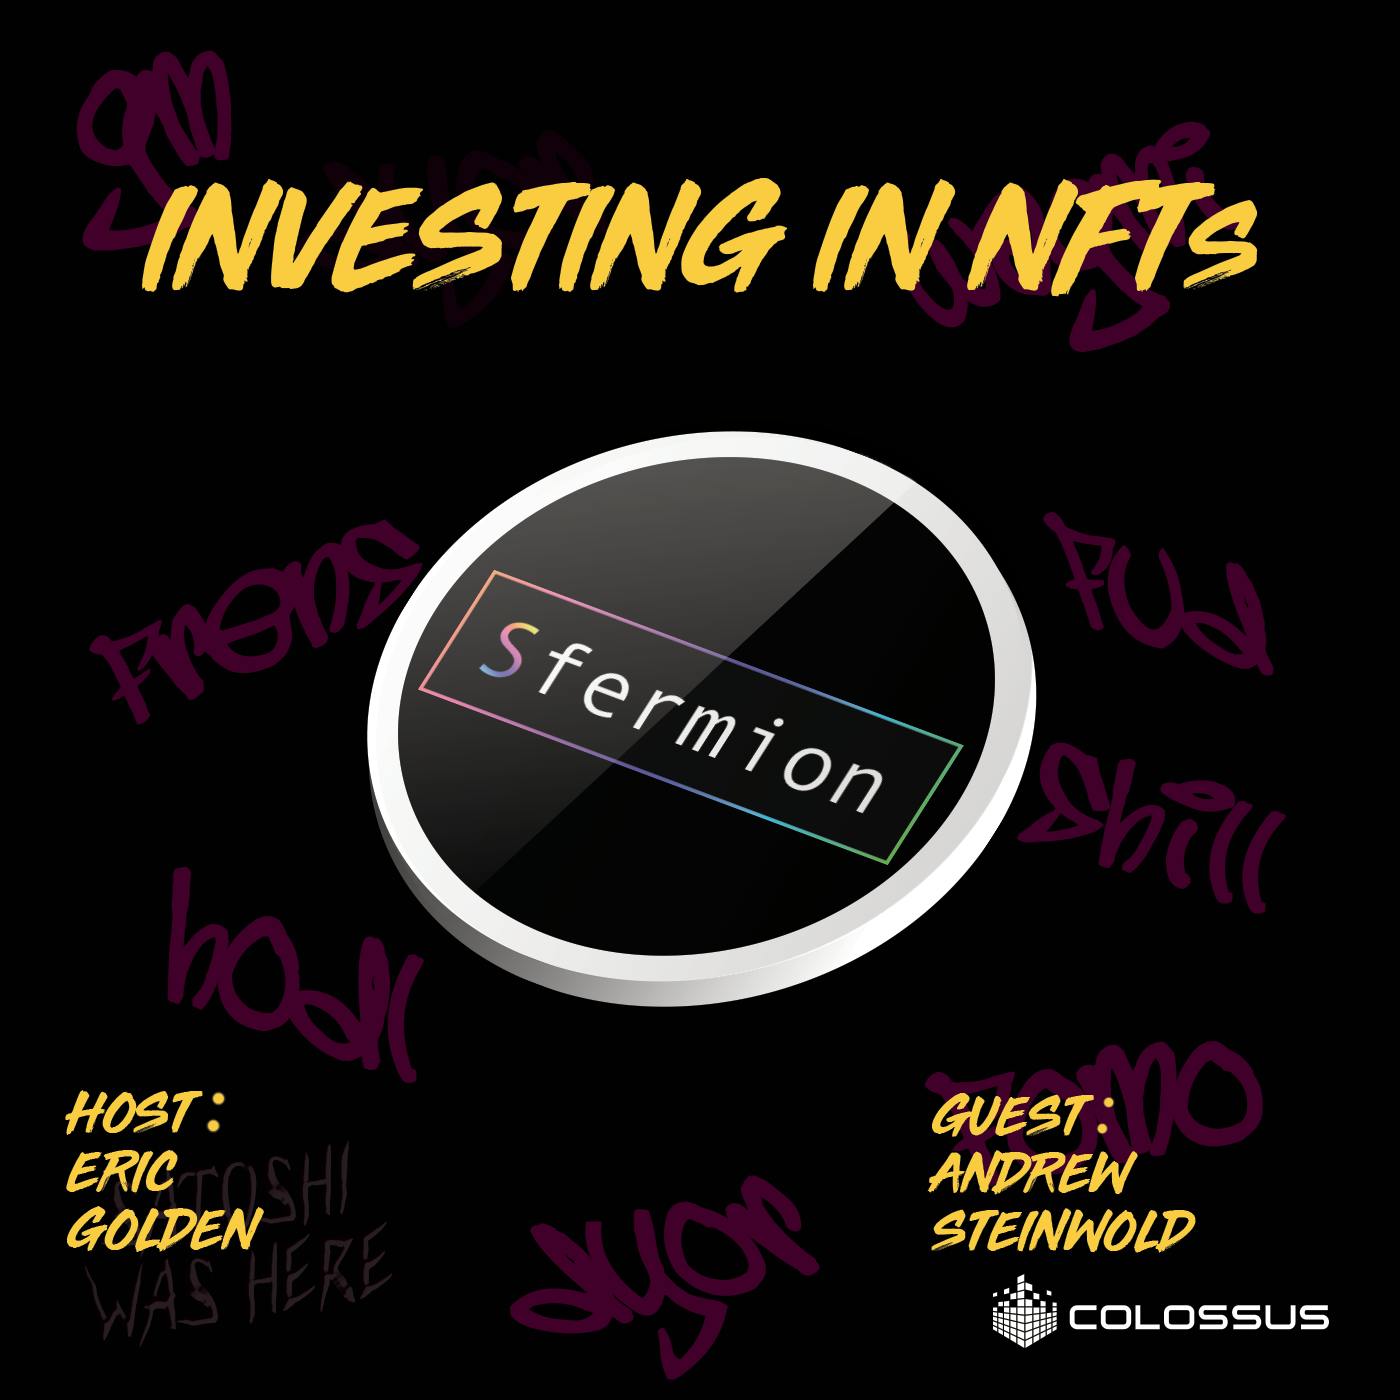 Andrew Steinwold: Investing in NFTs - [Web3 Breakdowns, EP.34]